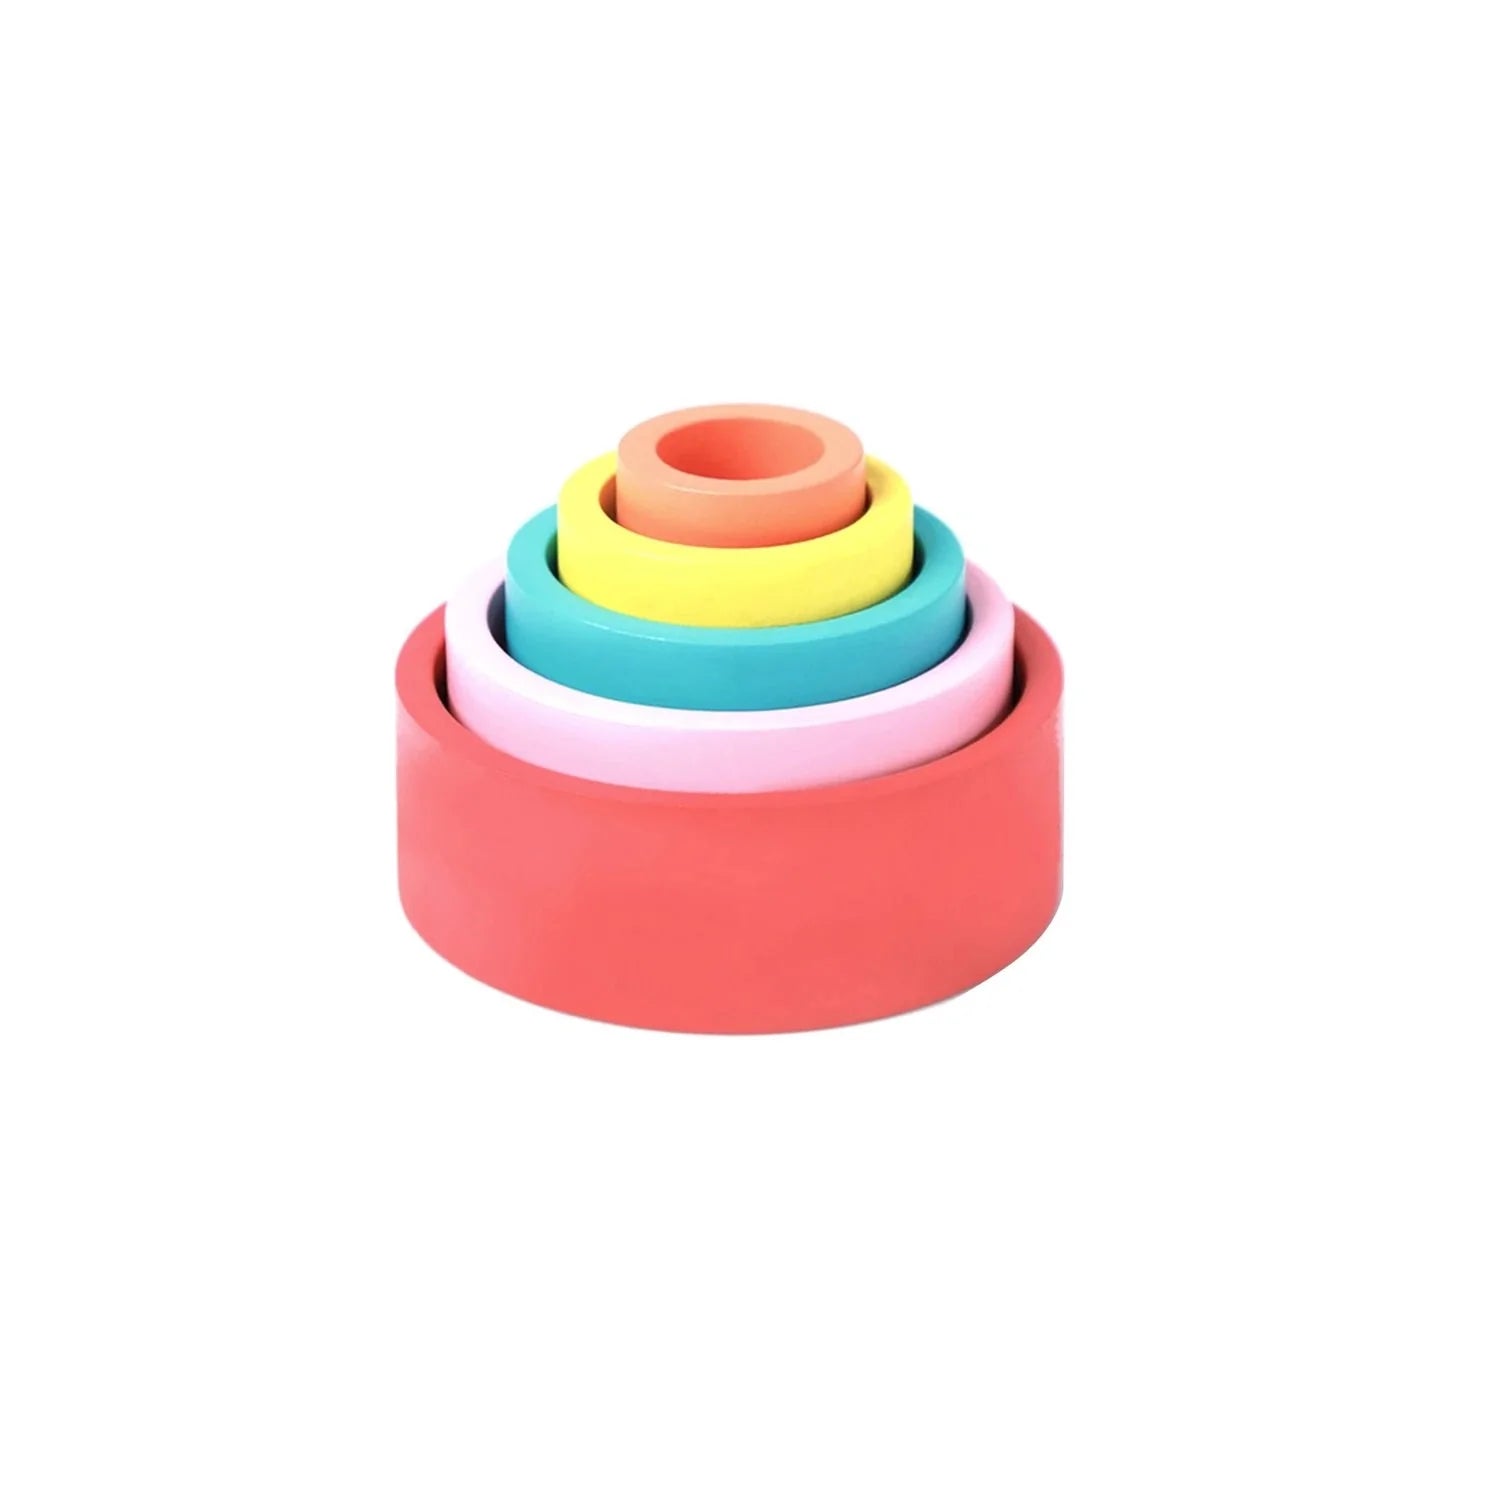 Buy Ariro Colored Wooden Nesting Bowls Toy - SkilloToys.com